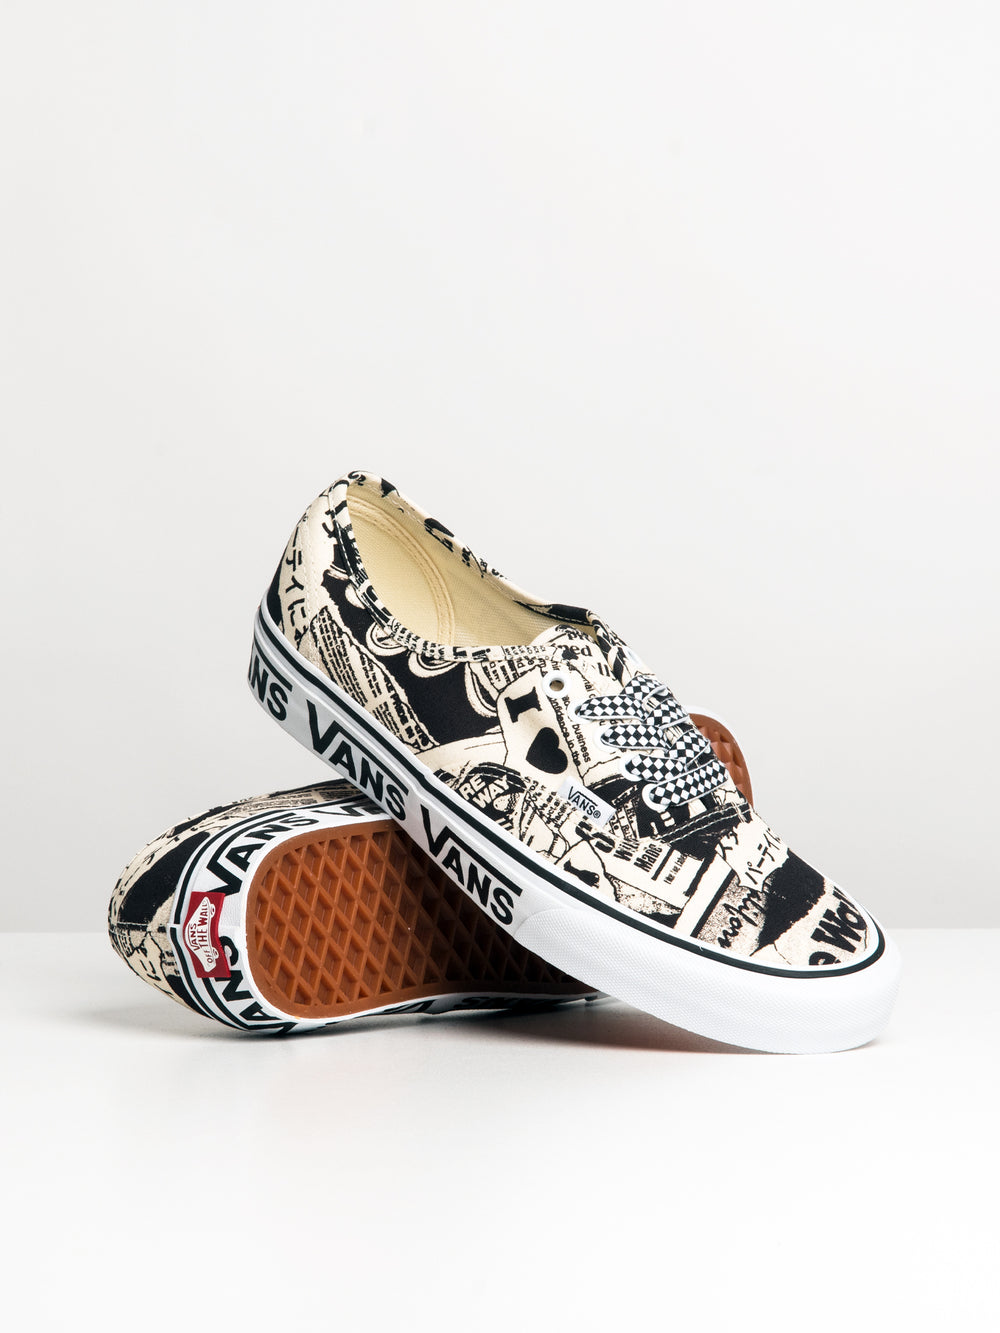 MENS AUTHENTIC - VANS COLLAGE - CLEARANCE